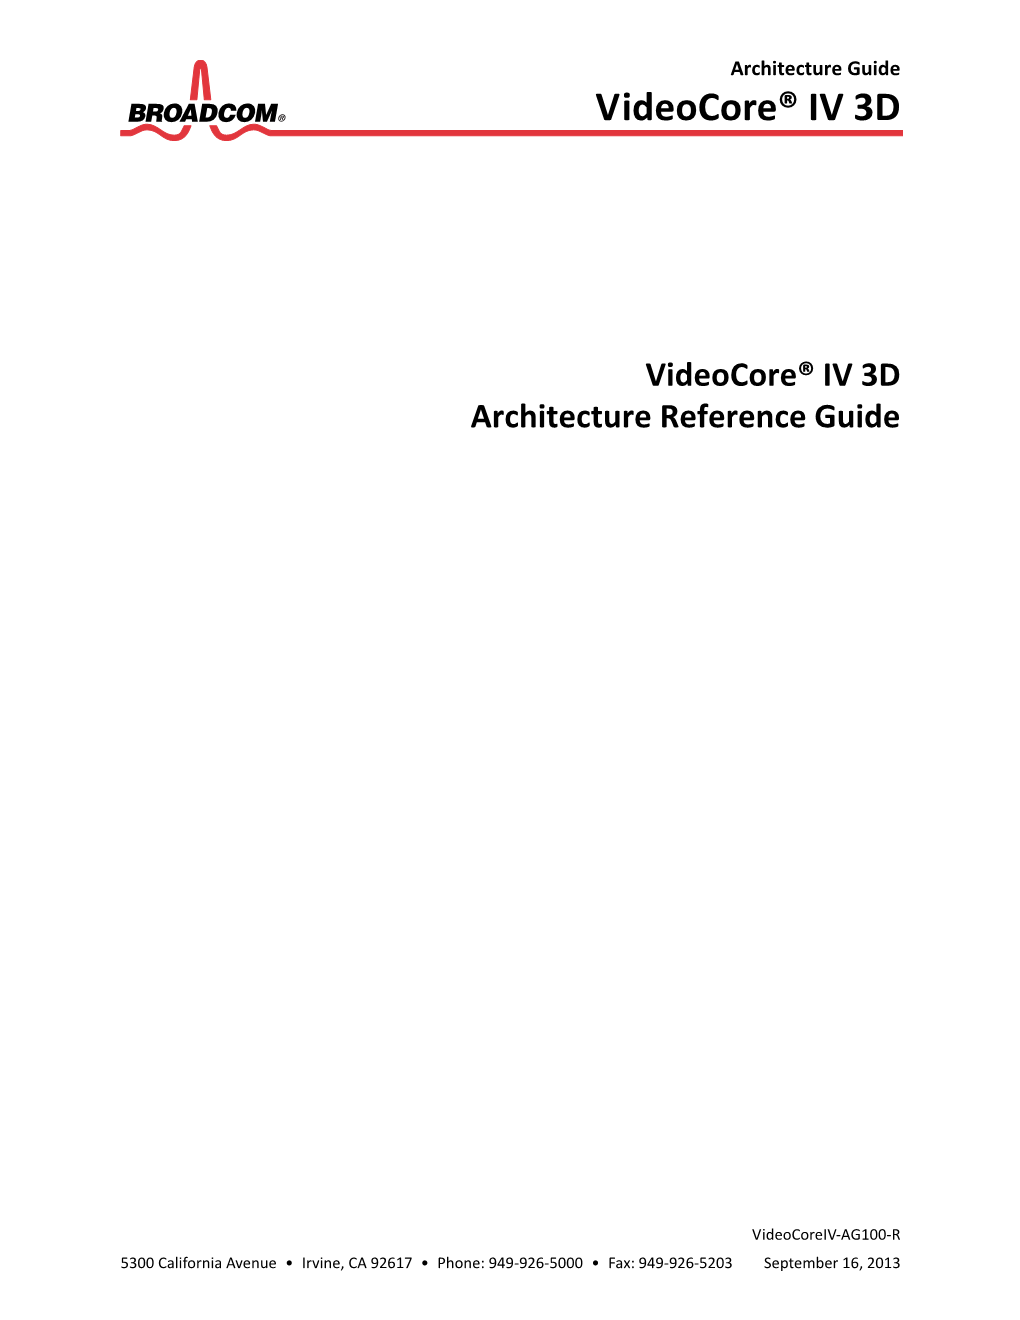 Videocore® IV 3D Architecture Reference Guide